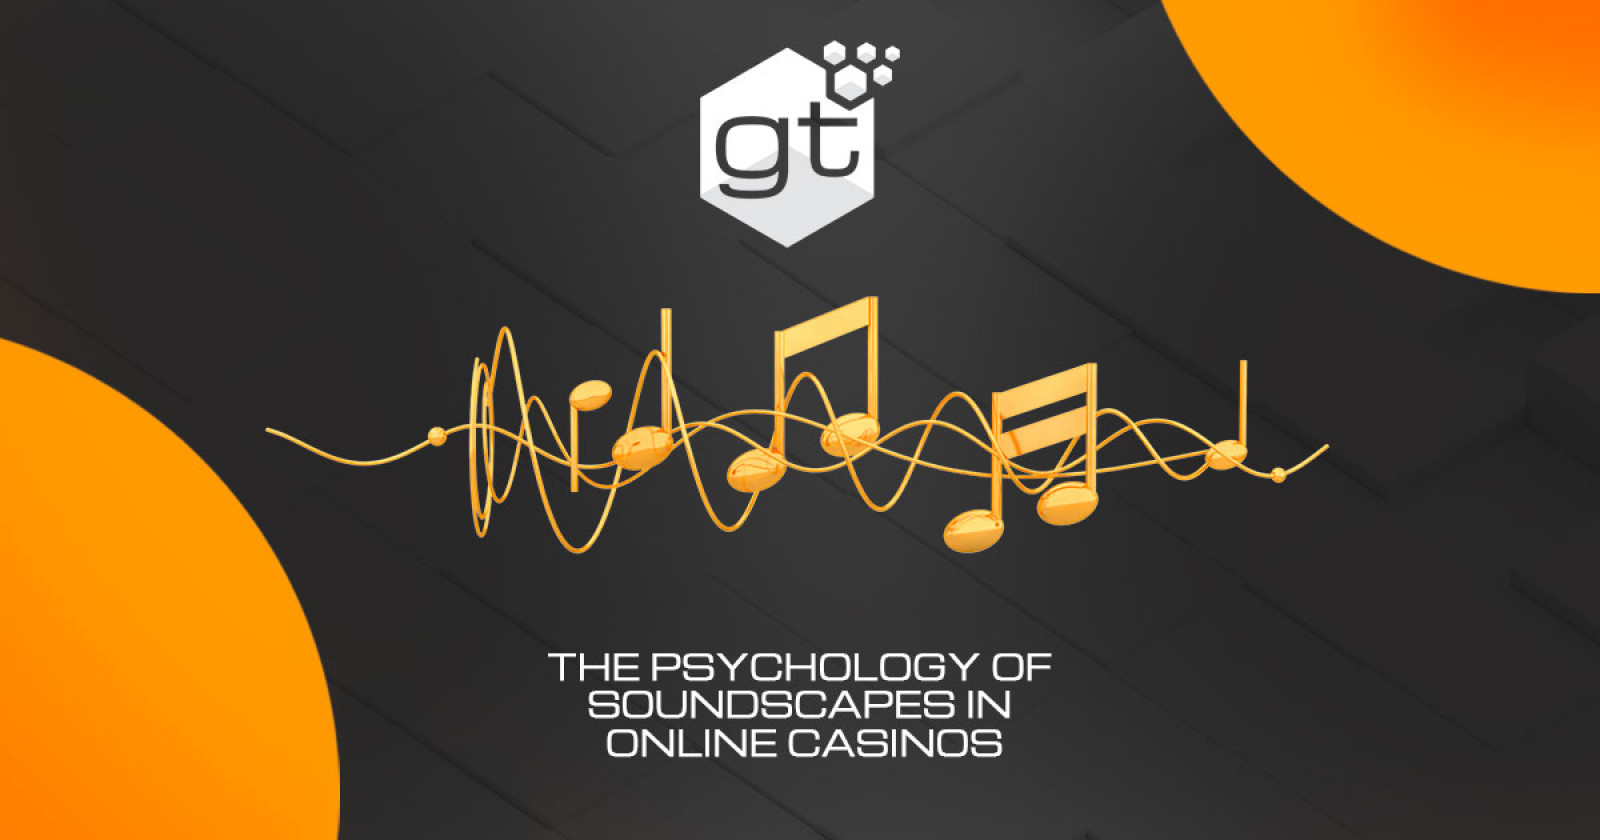 The psychological effect of soundscapes in online casinos